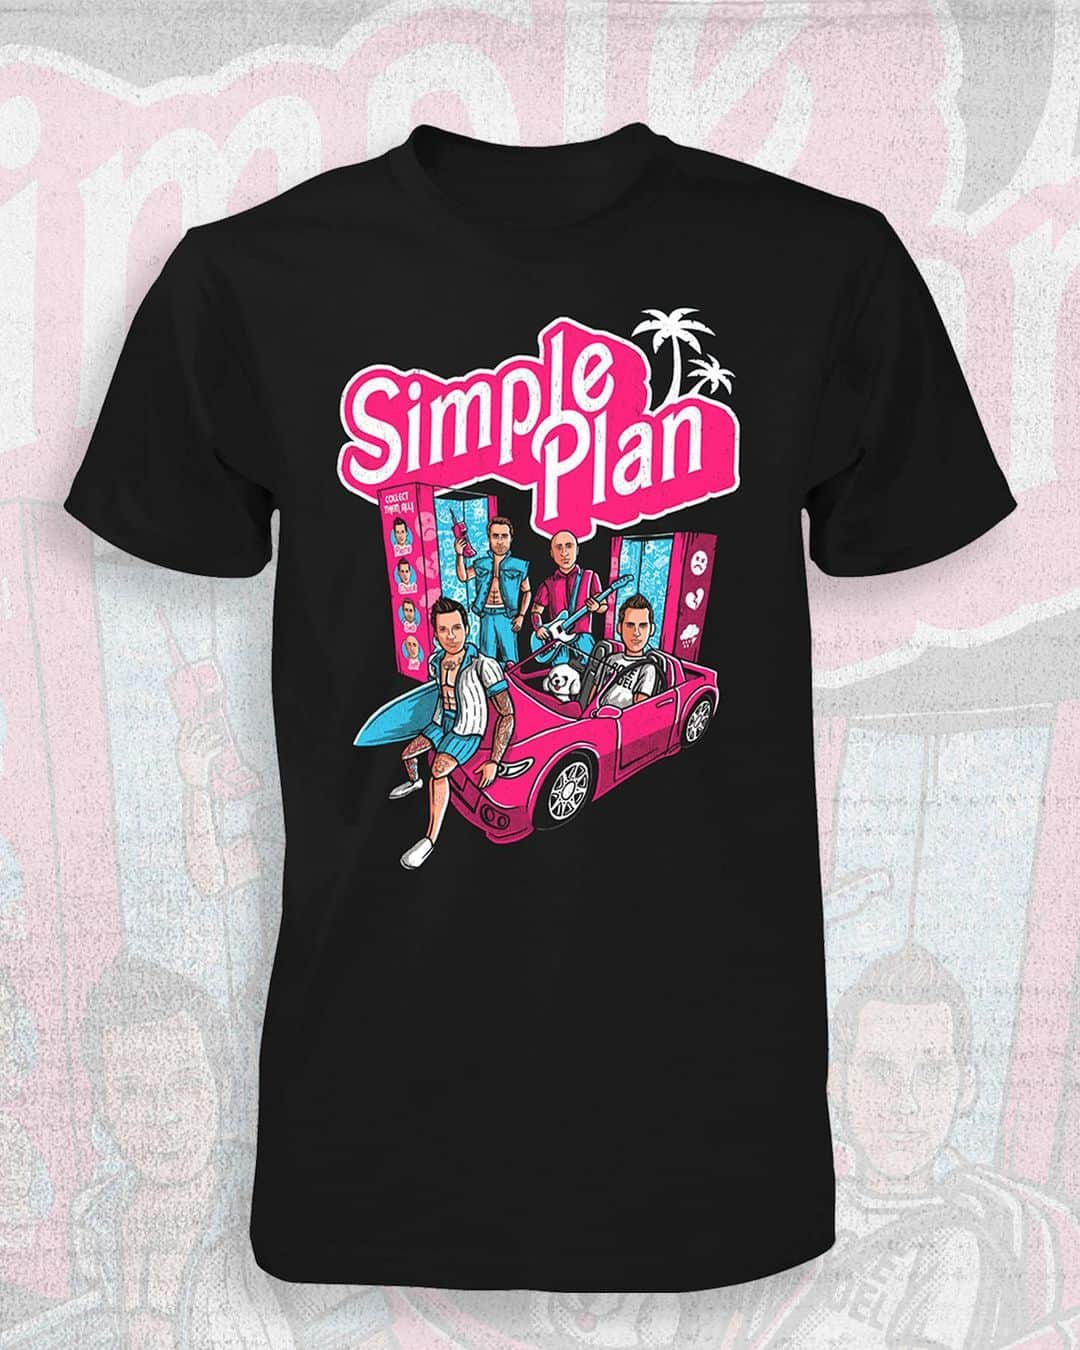 Simple Planのインスタグラム：「Our job is just band.  We heard you! After seeing the record number of comments asking where to get Pierre’s epic Simple Plan Dolls shirt, we decided to add it to our online store, along with a bunch of other amazing new designs! Go grab yours now at simpleplanstore.com before they’re all gone! 🤘💗💖」